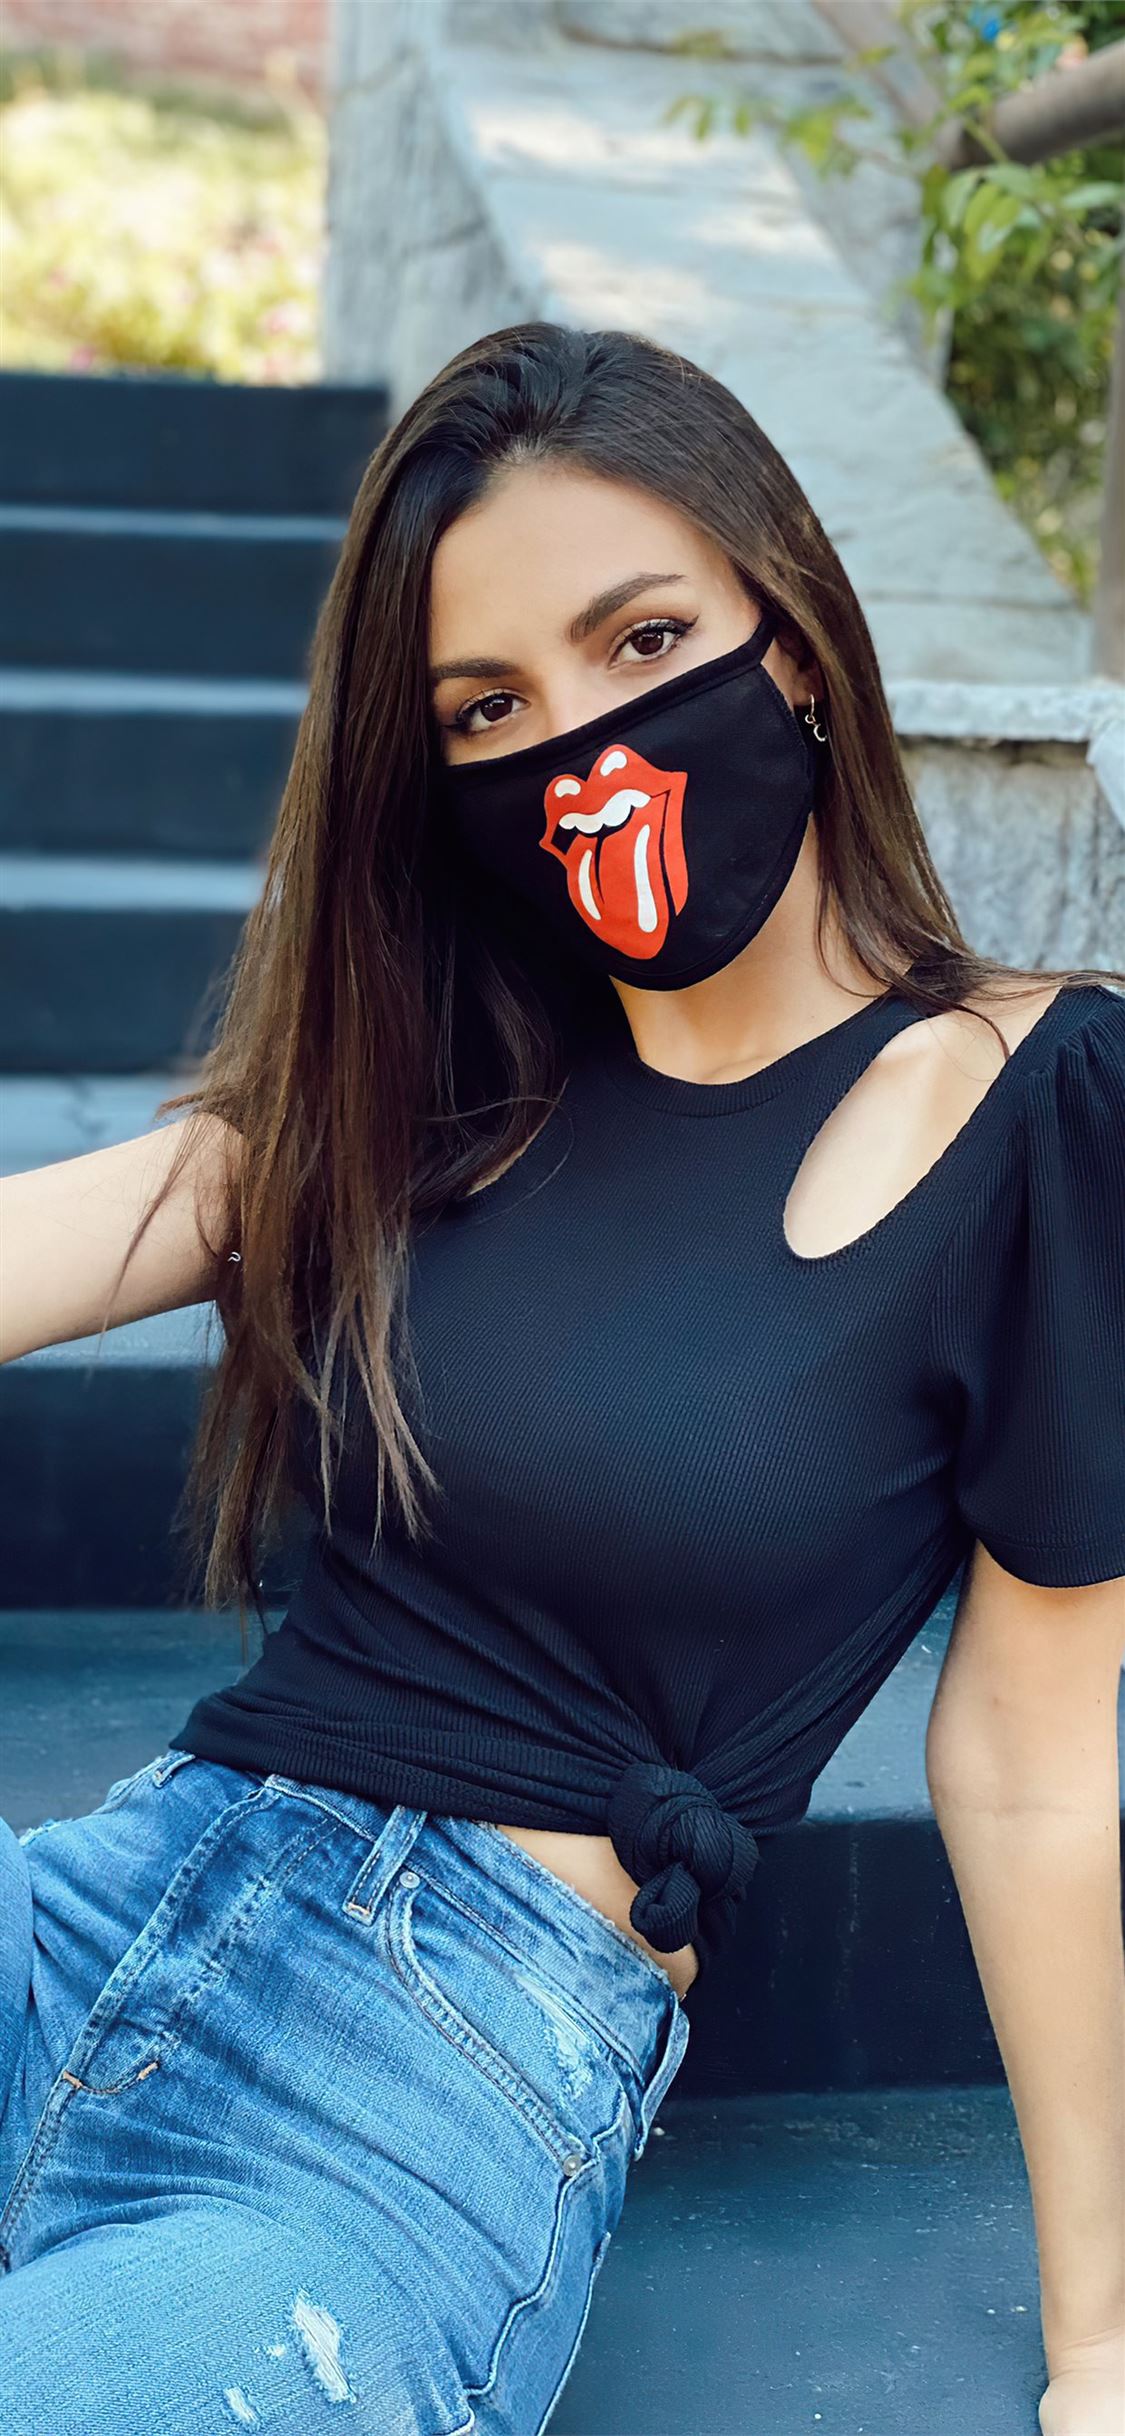 victoria justice mask 4k iPhone X Wallpaper Free Download